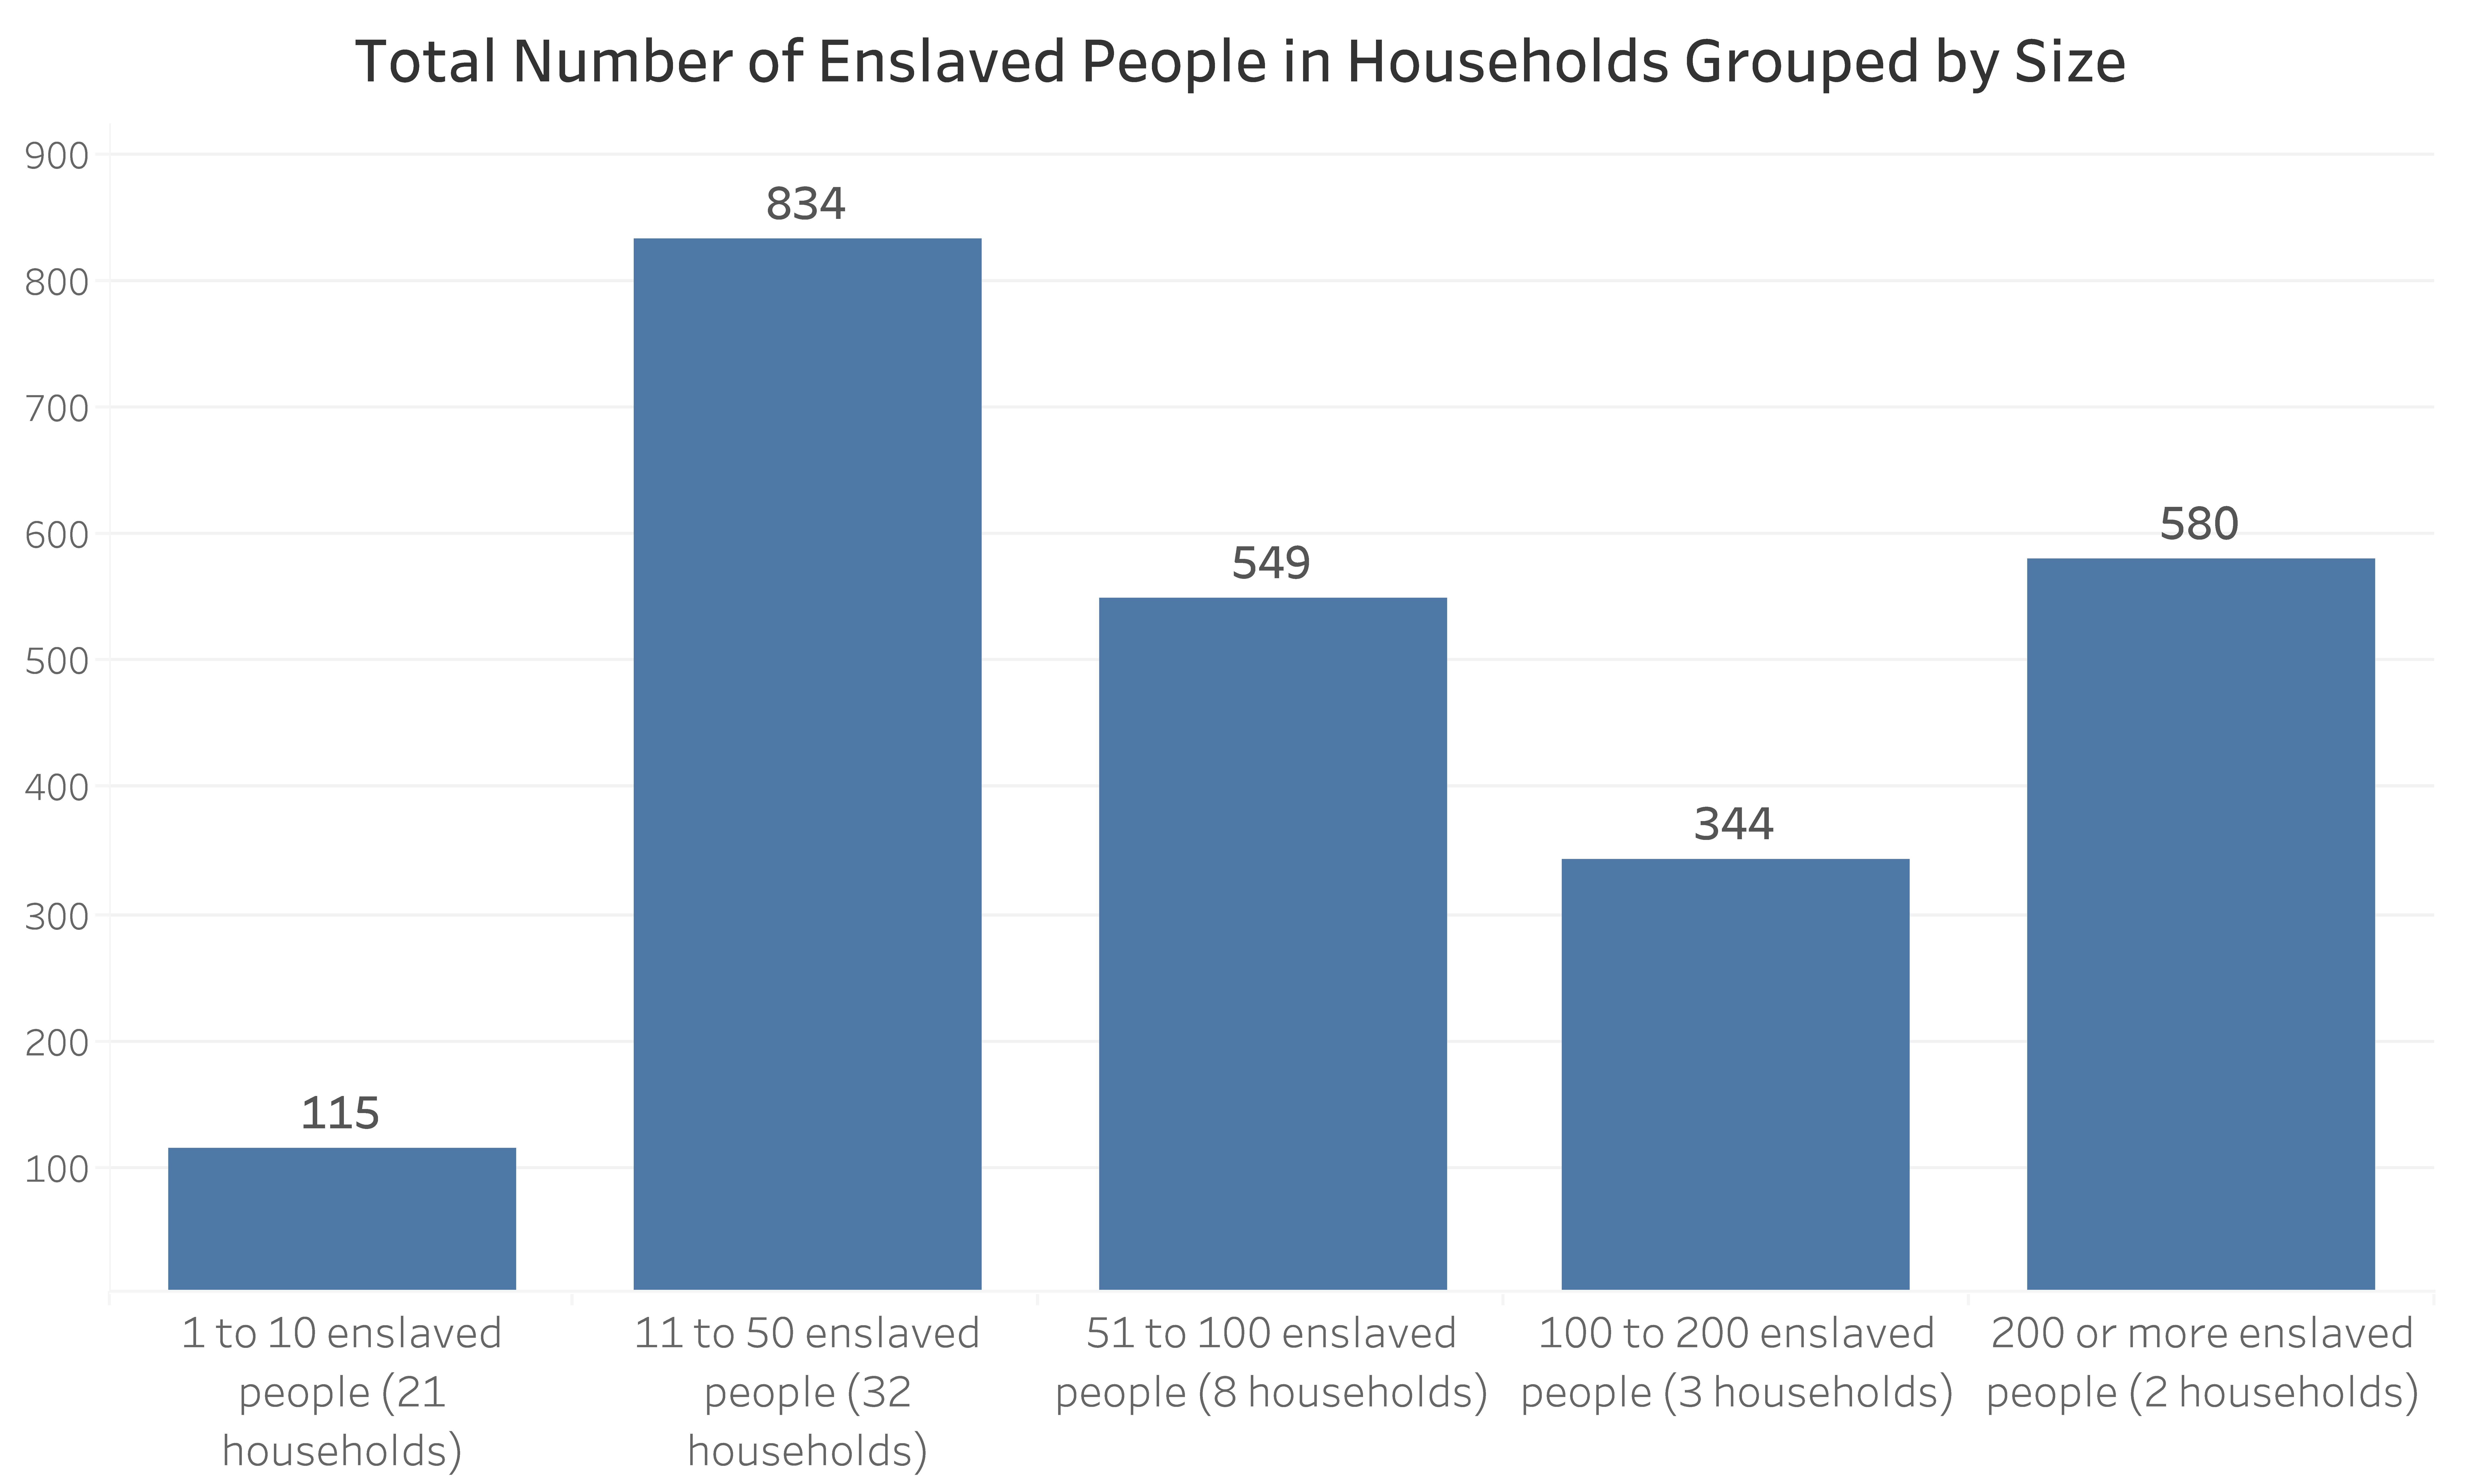 Bar graph that shows the total number of enslaved people in households, grouped by size.